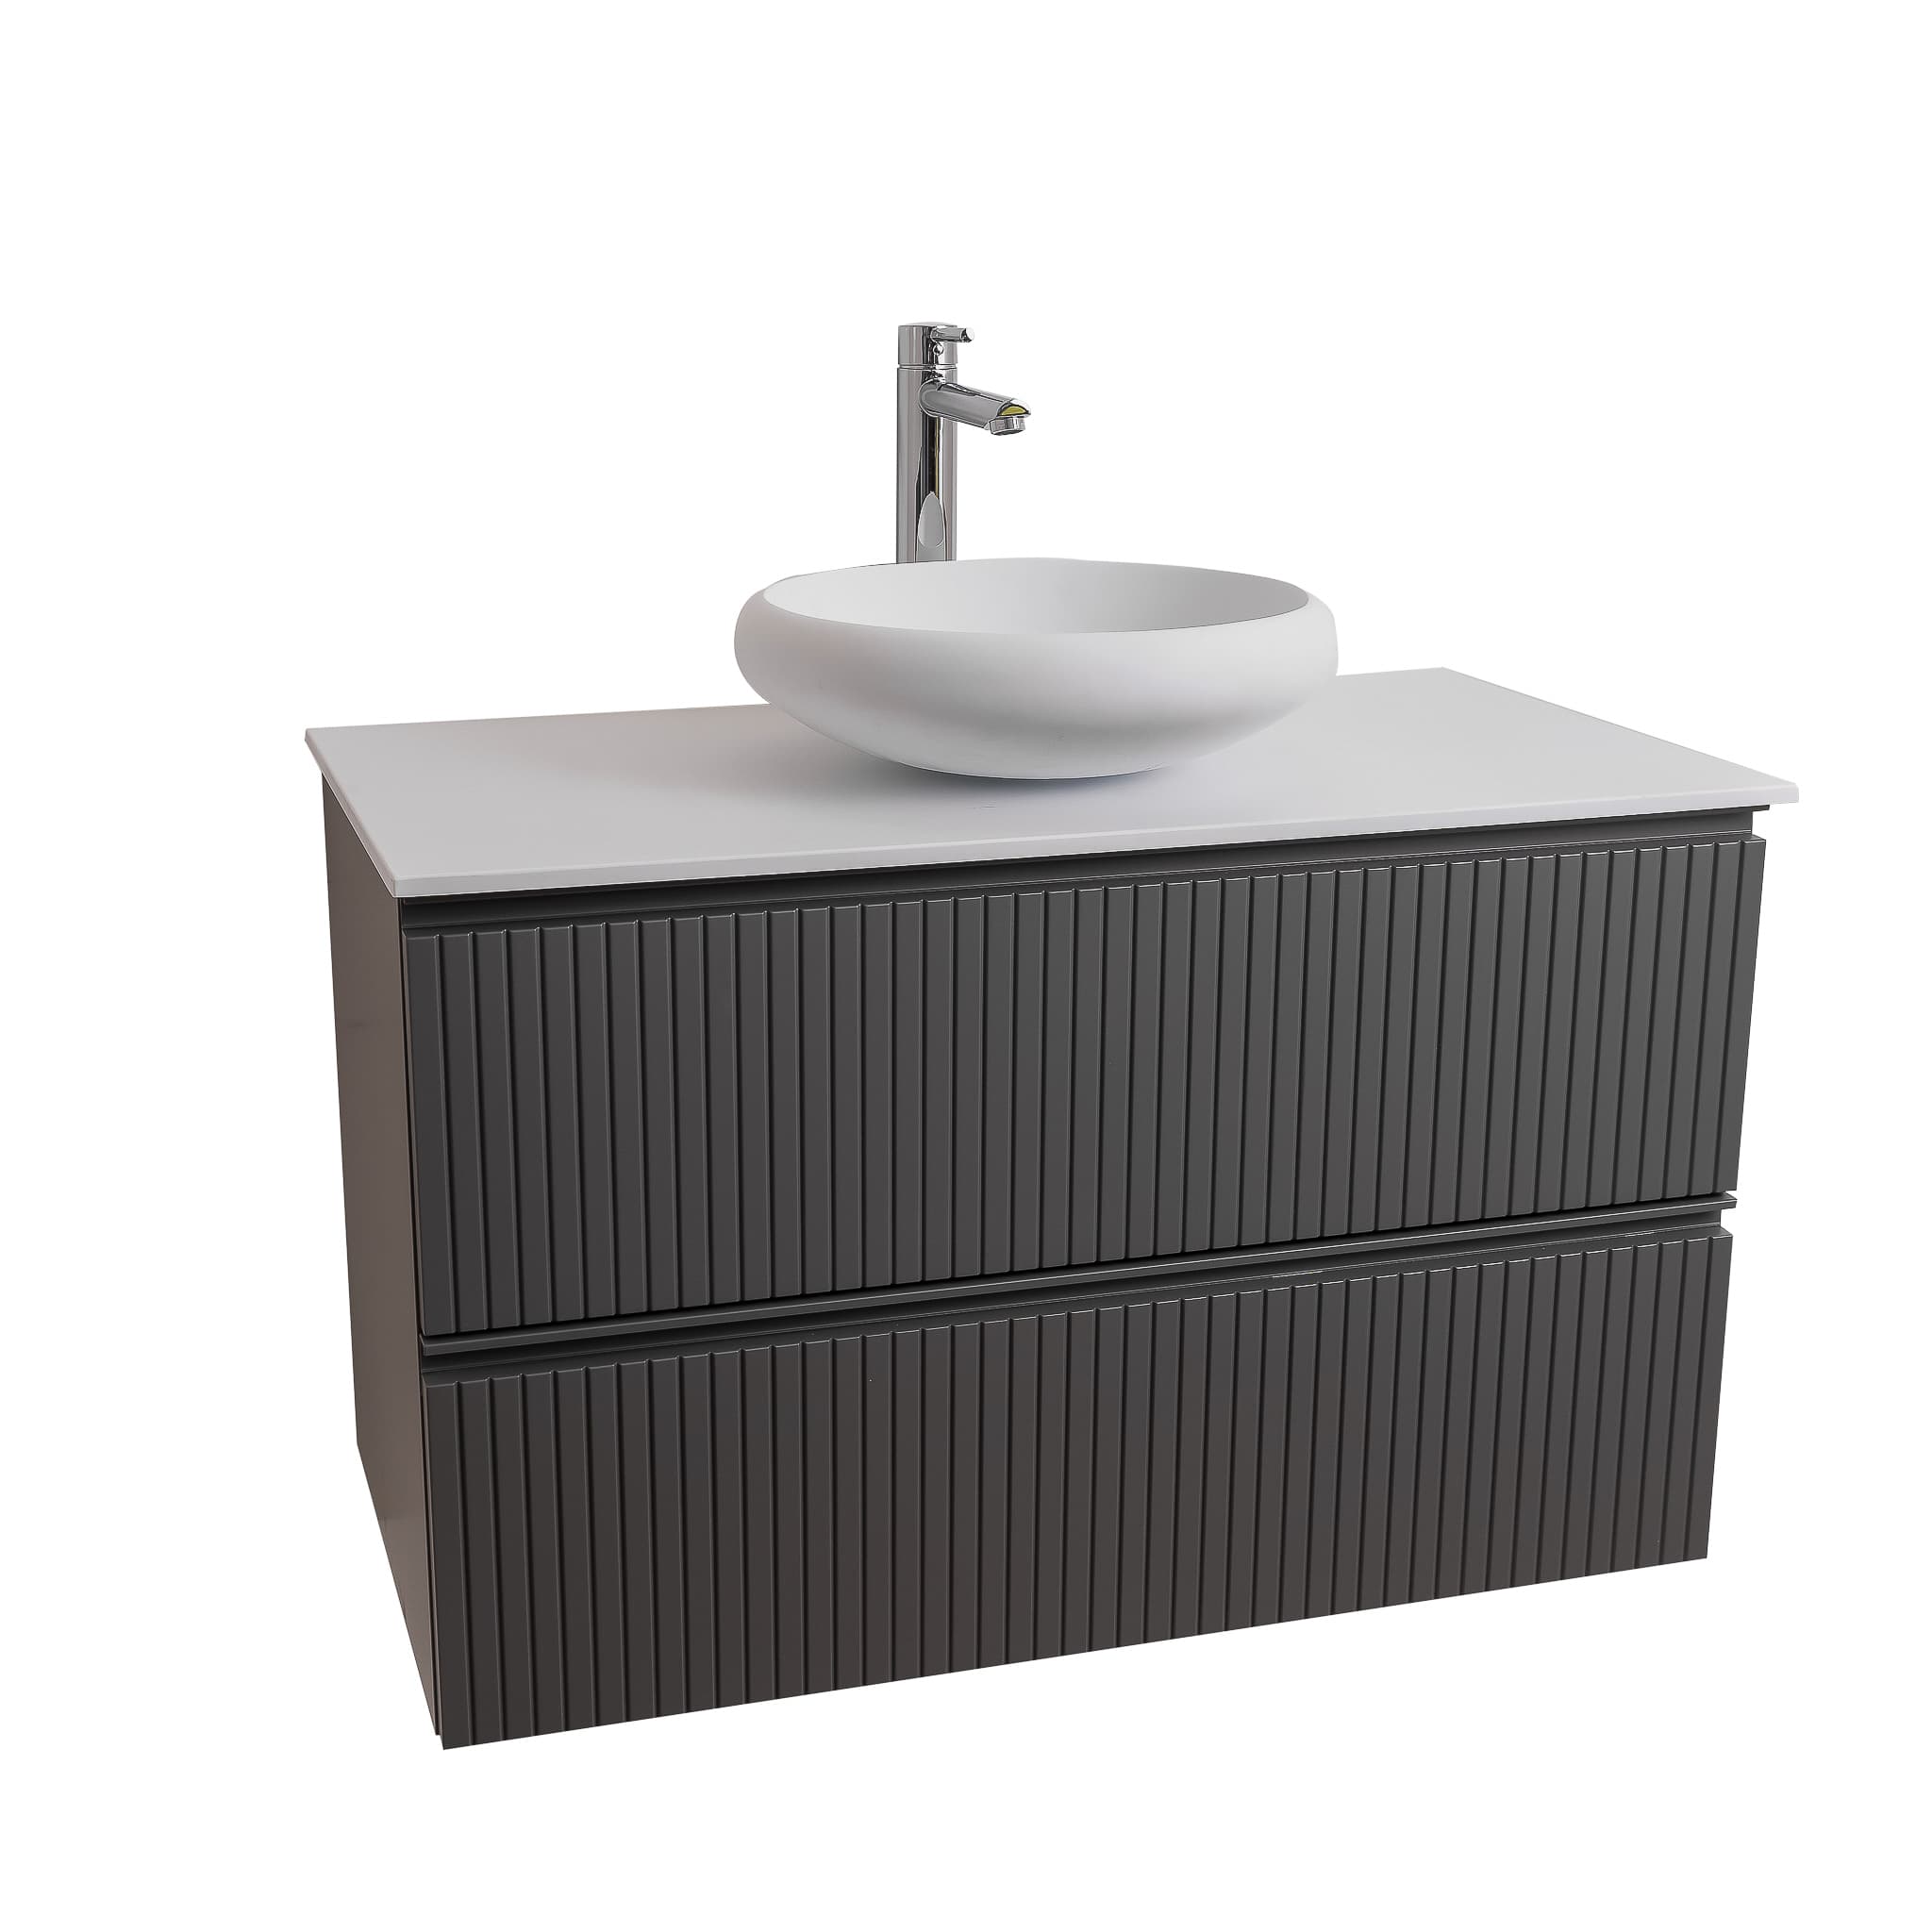 Ares 39.5 Matte Grey Cabinet, Solid Surface Flat White Counter And Round Solid Surface White Basin 1153, Wall Mounted Modern Vanity Set